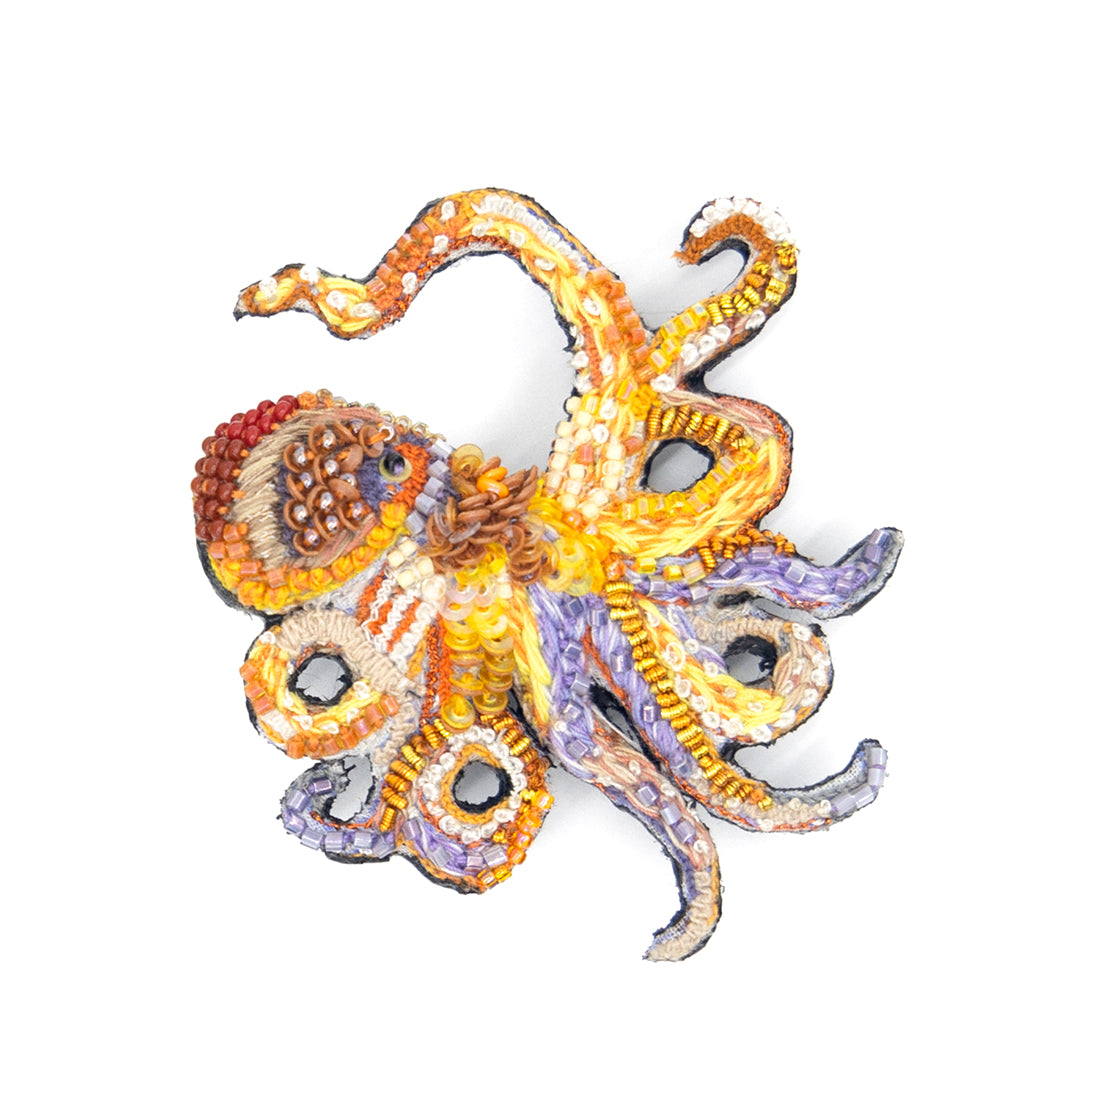 Giant Pacific Octopus Brooch Pin